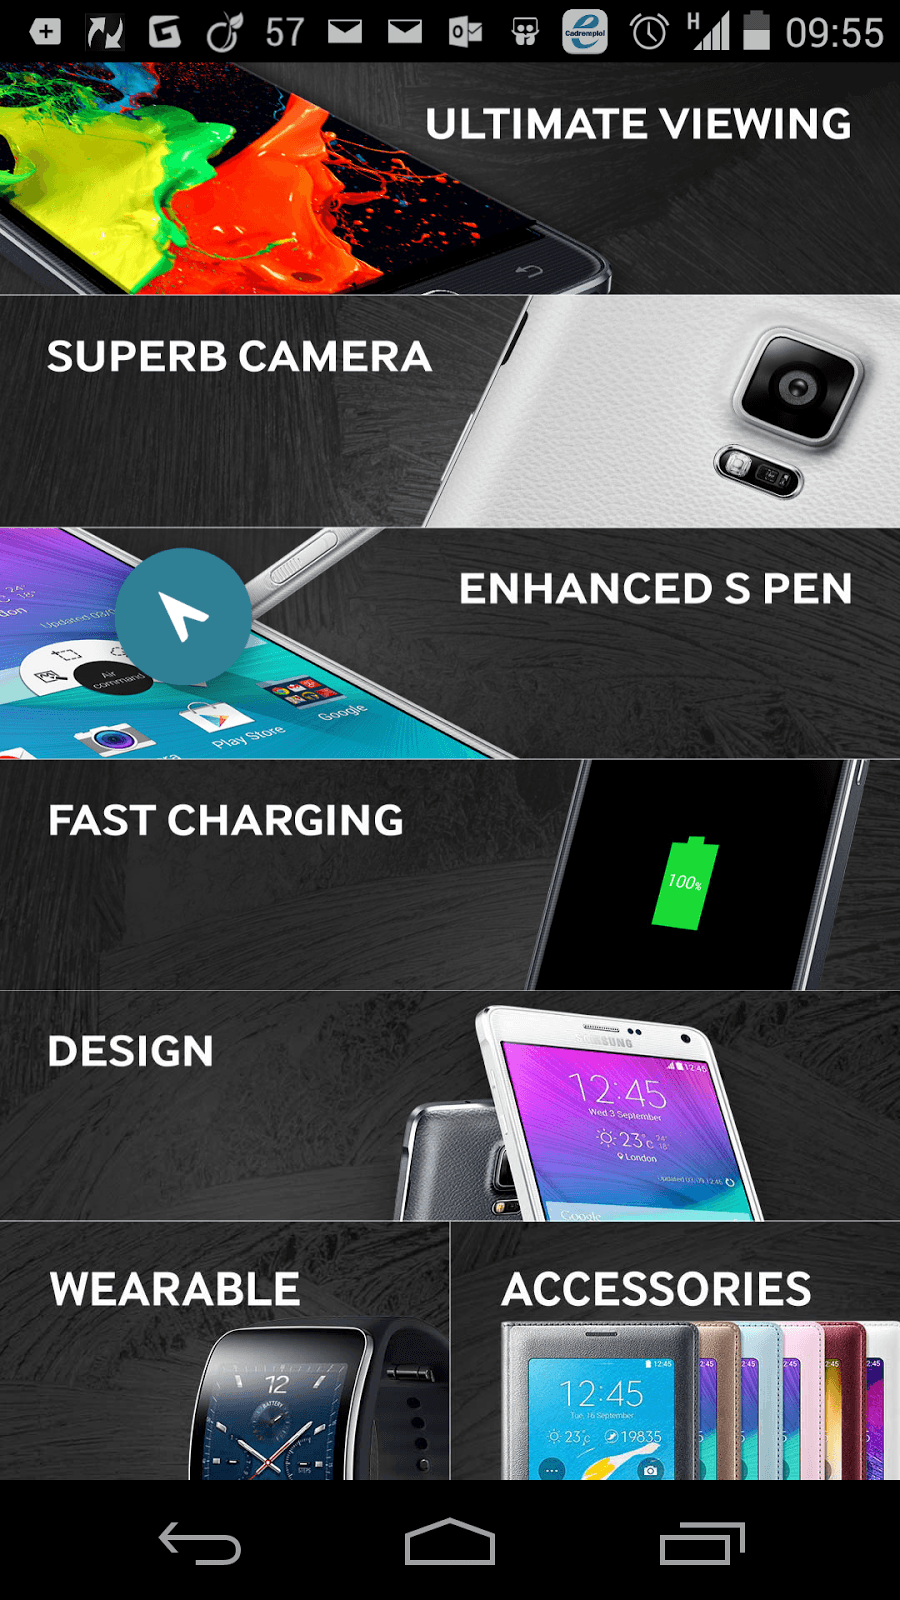 Galaxy Note 4 Experience